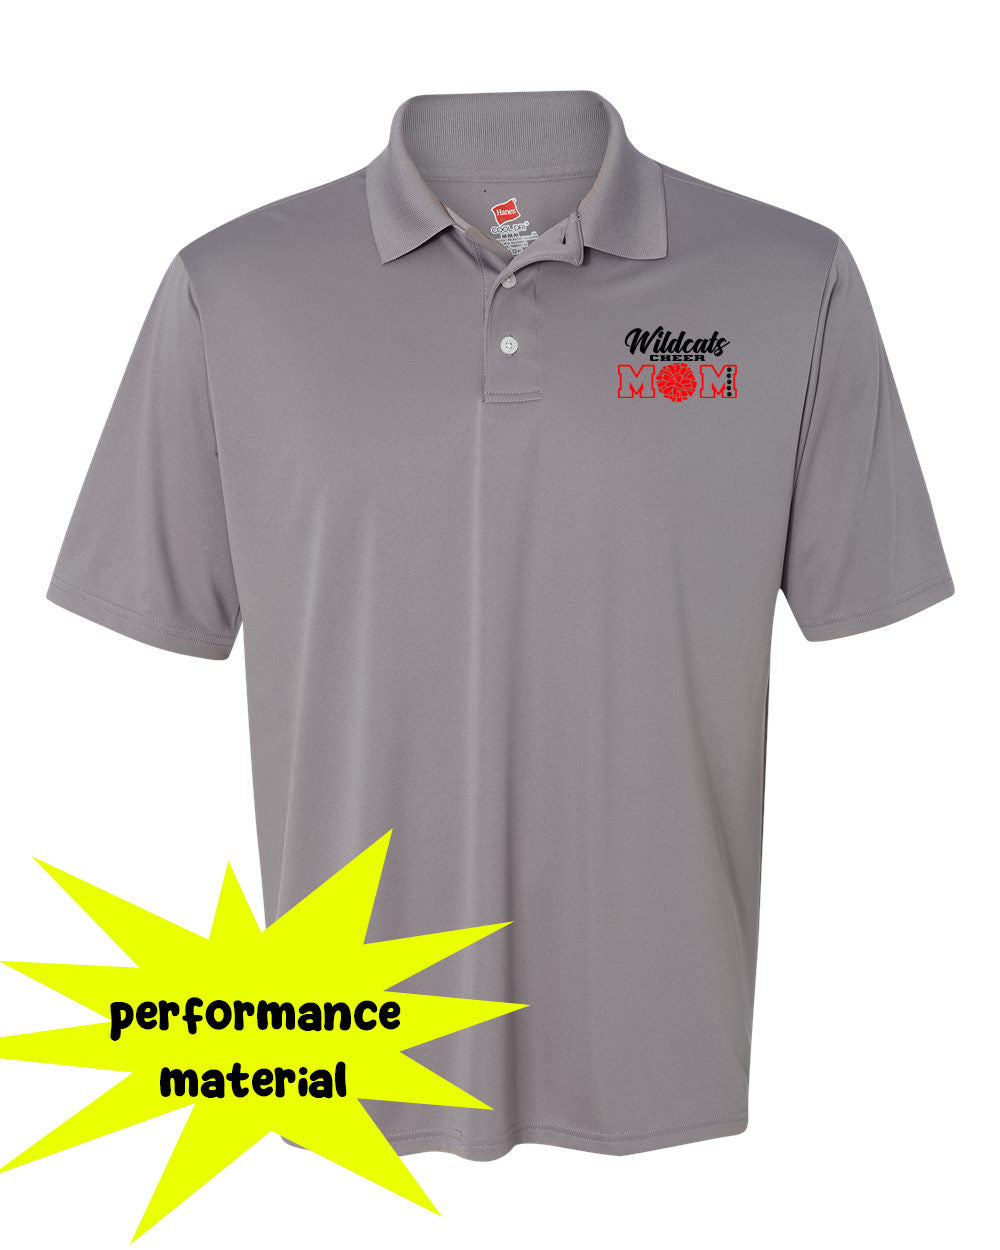 Wildcats Cheer Design 7 Performance Material Polo T-Shirt